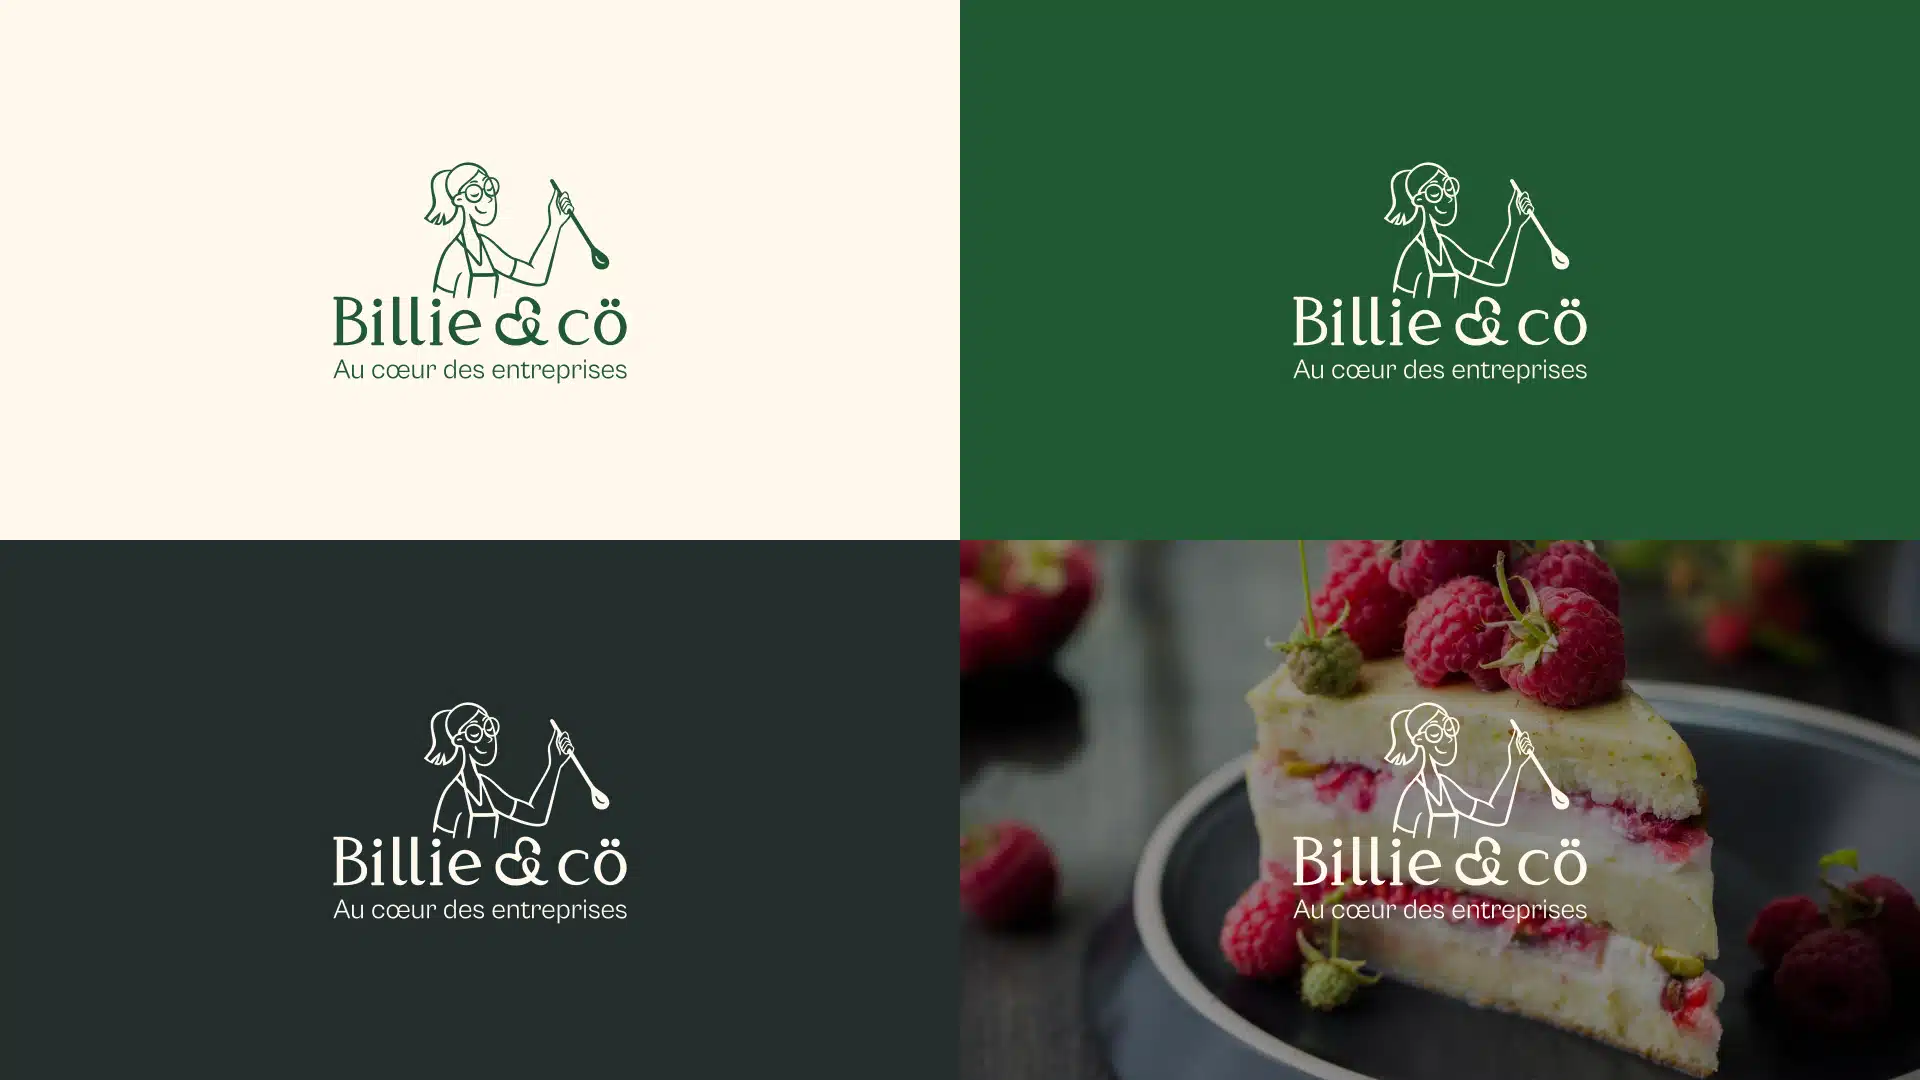 Billie&co Logos Container